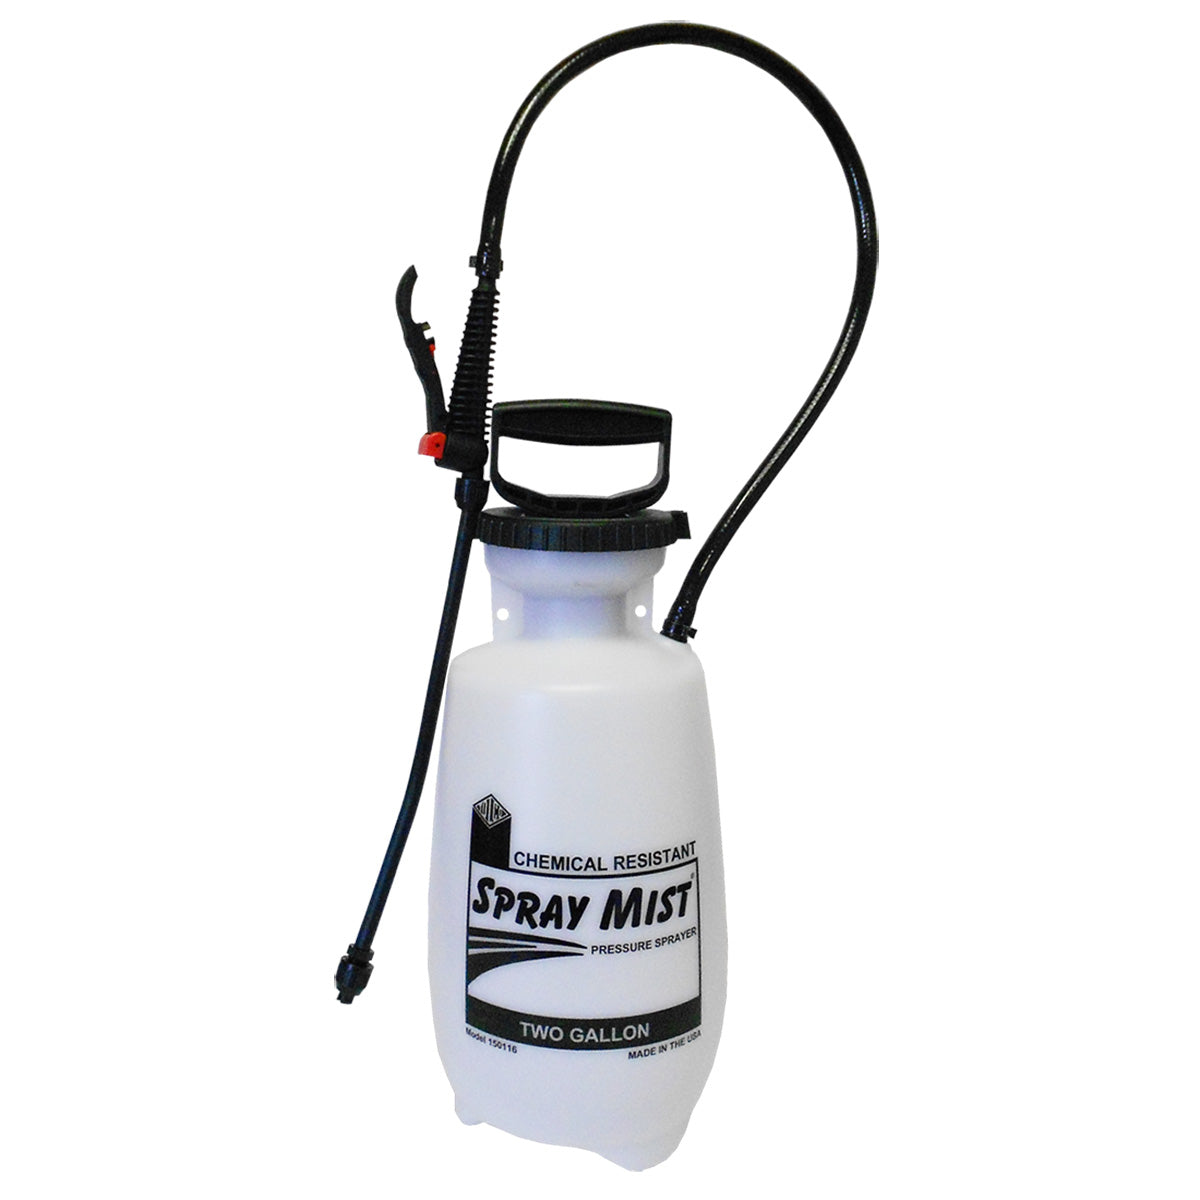 Tolco® Chemical Resistant Spray Mist® 2 Gallon Pump Up Pressure